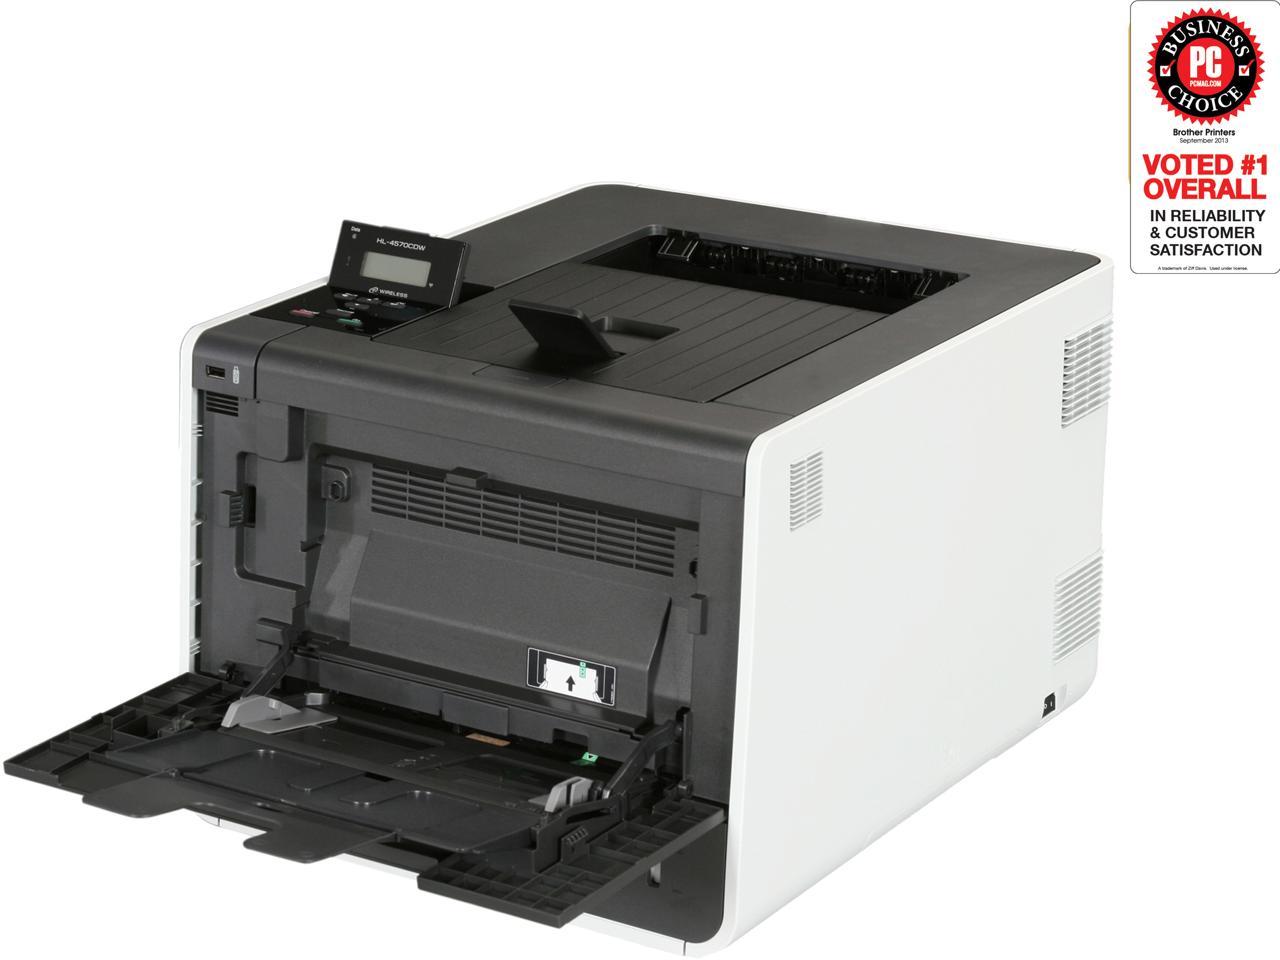 Brother HL-4570CDW Color Laser Printer with Wireless Networking